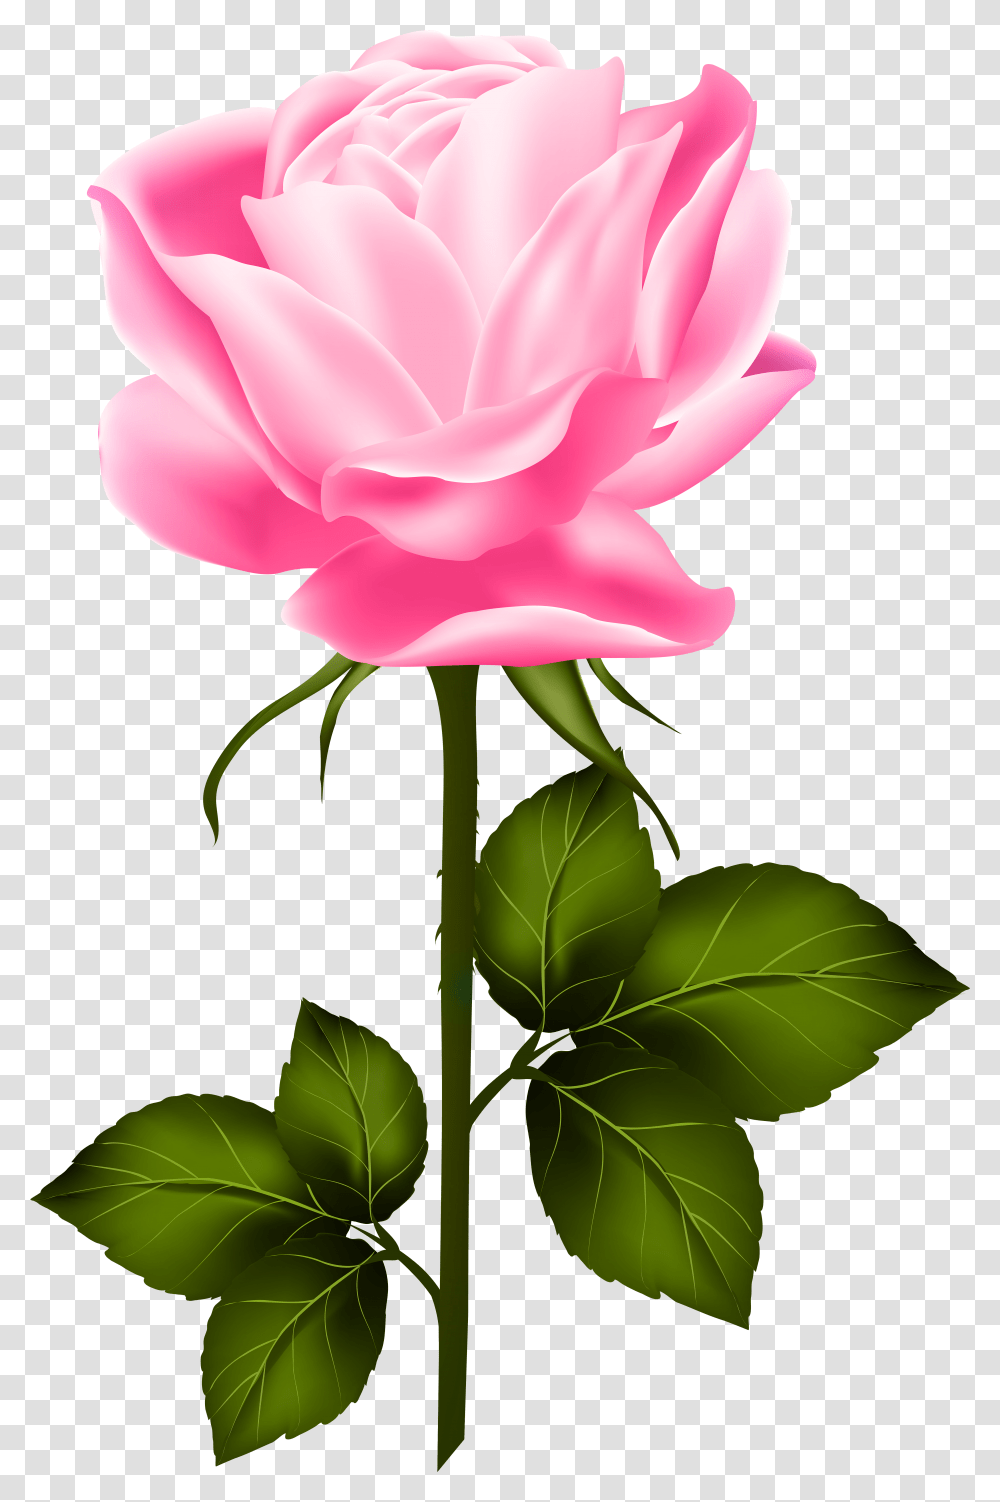 Pink With Stem Purple Rose With Stem Transparent Png